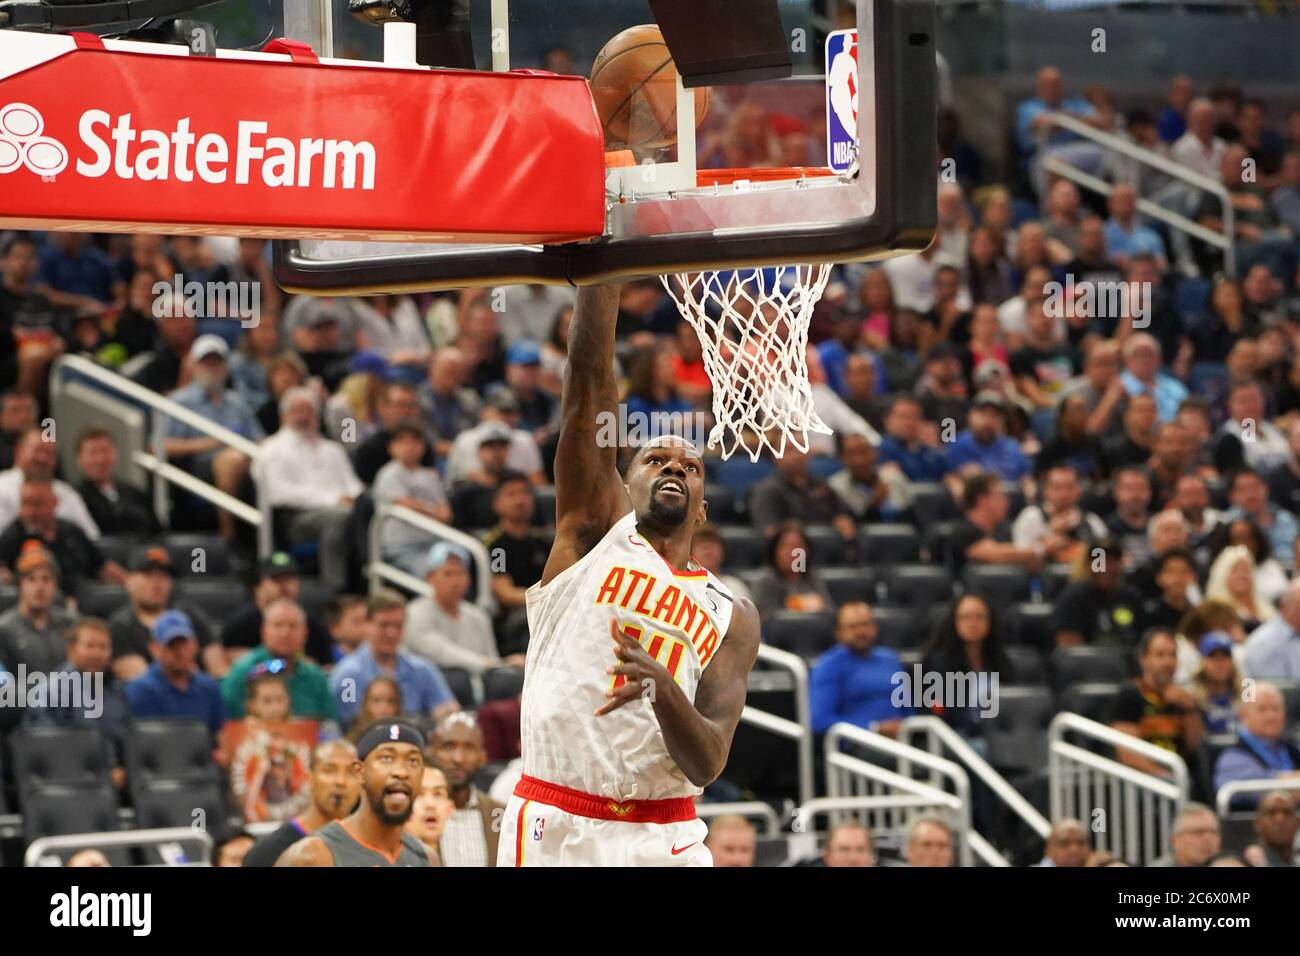 Atlanta Hawks player Dewayne Dedmon #14 makes a layup during the game at the Amway Center in Orlando Florida on Monday February 8, 2020.  Photo Credit Stock Photo